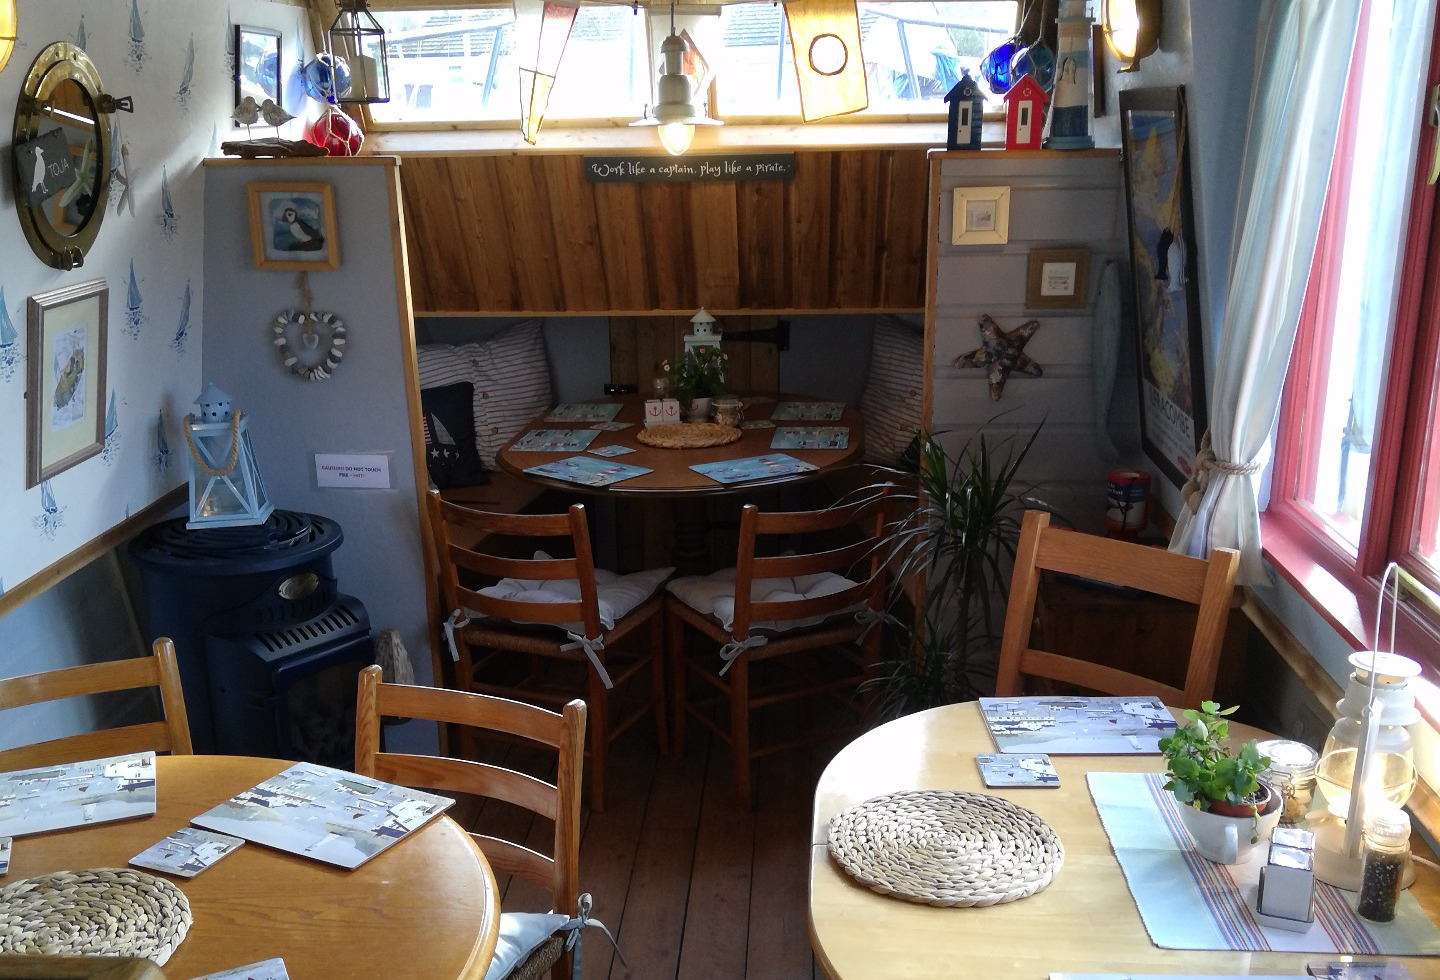 Restaurant seating area in Boat.